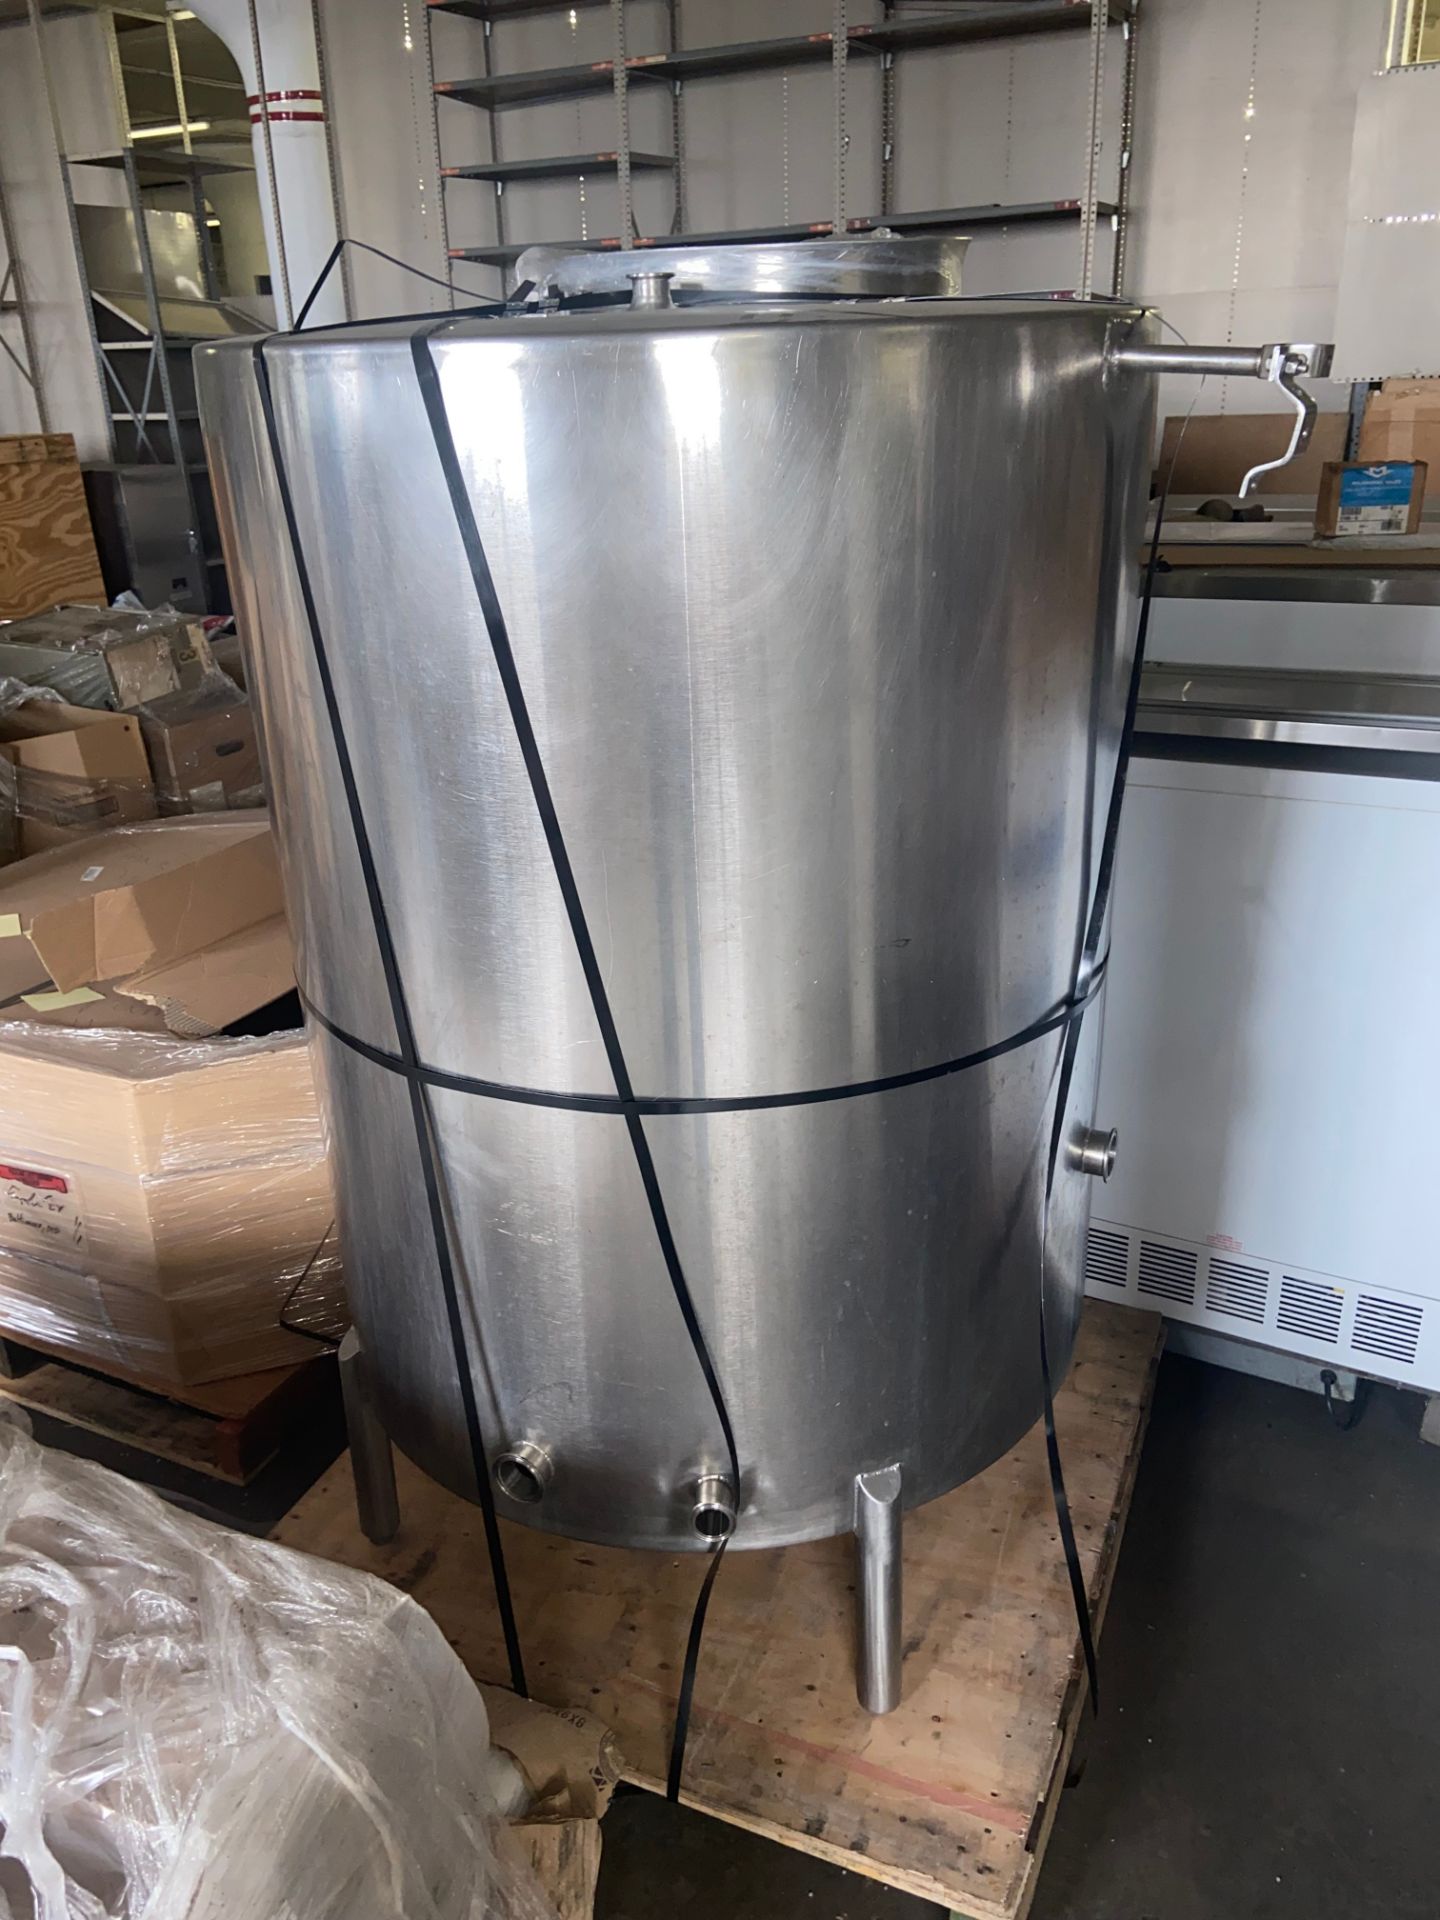 Aprox. 500 Gal. S/S Single Wall Balance Tank, Mounted on S/S Legs (LOCATED IN BALTIMORE, MD) (